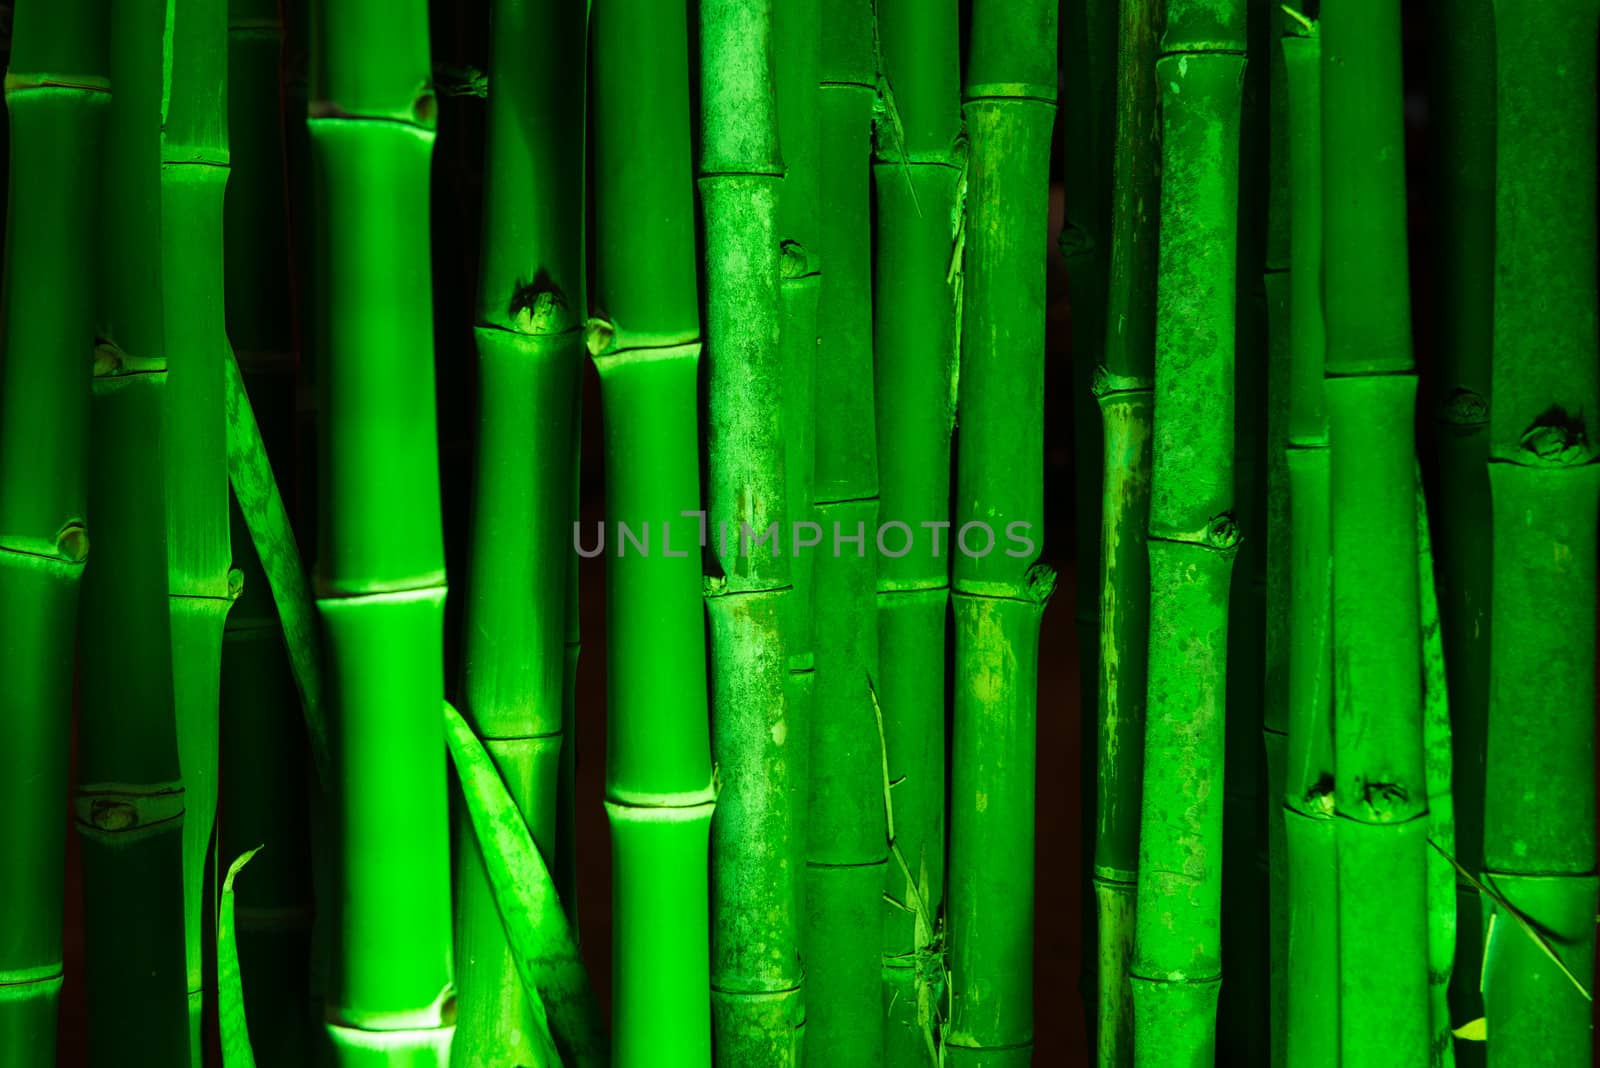 Bamboo forest by Kenishirotie